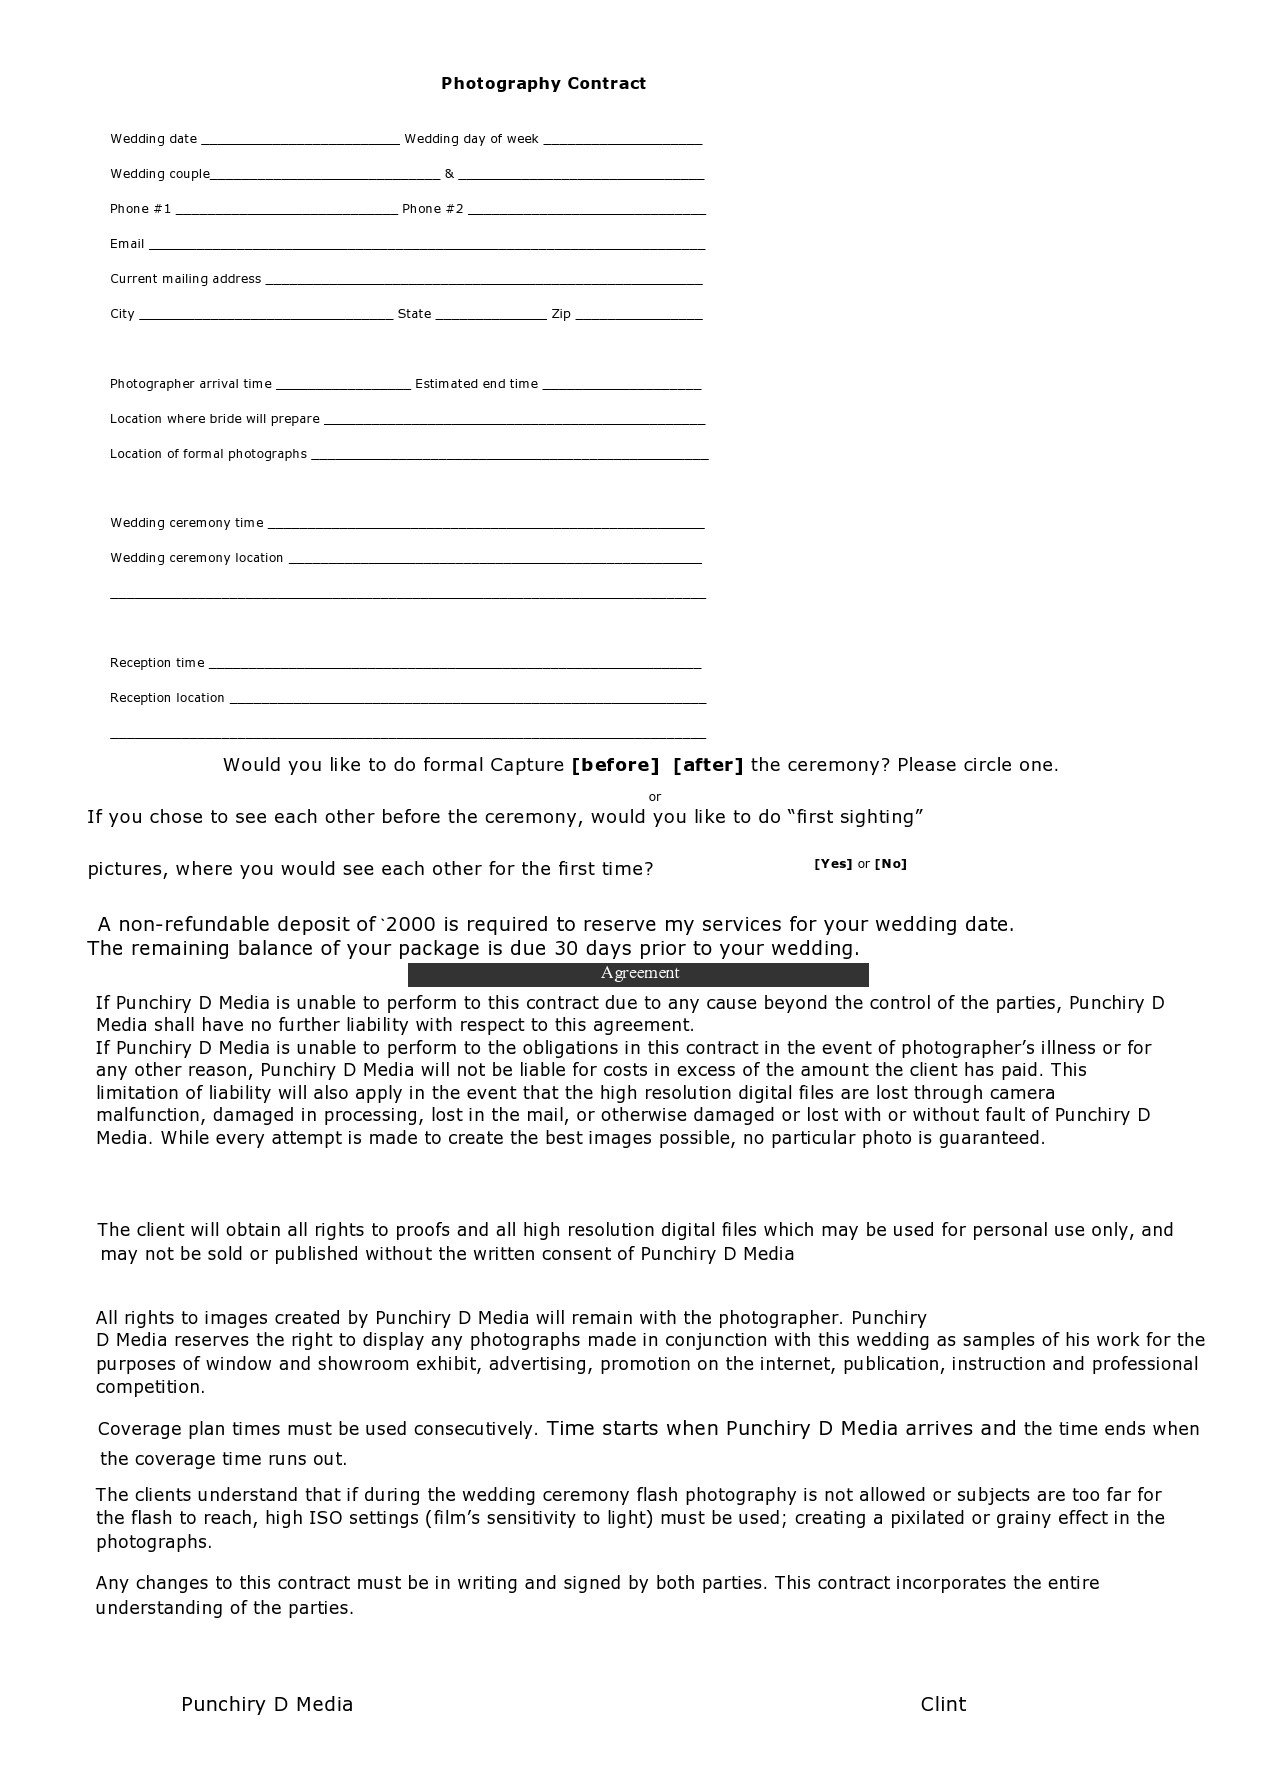 Free photography contract template 11